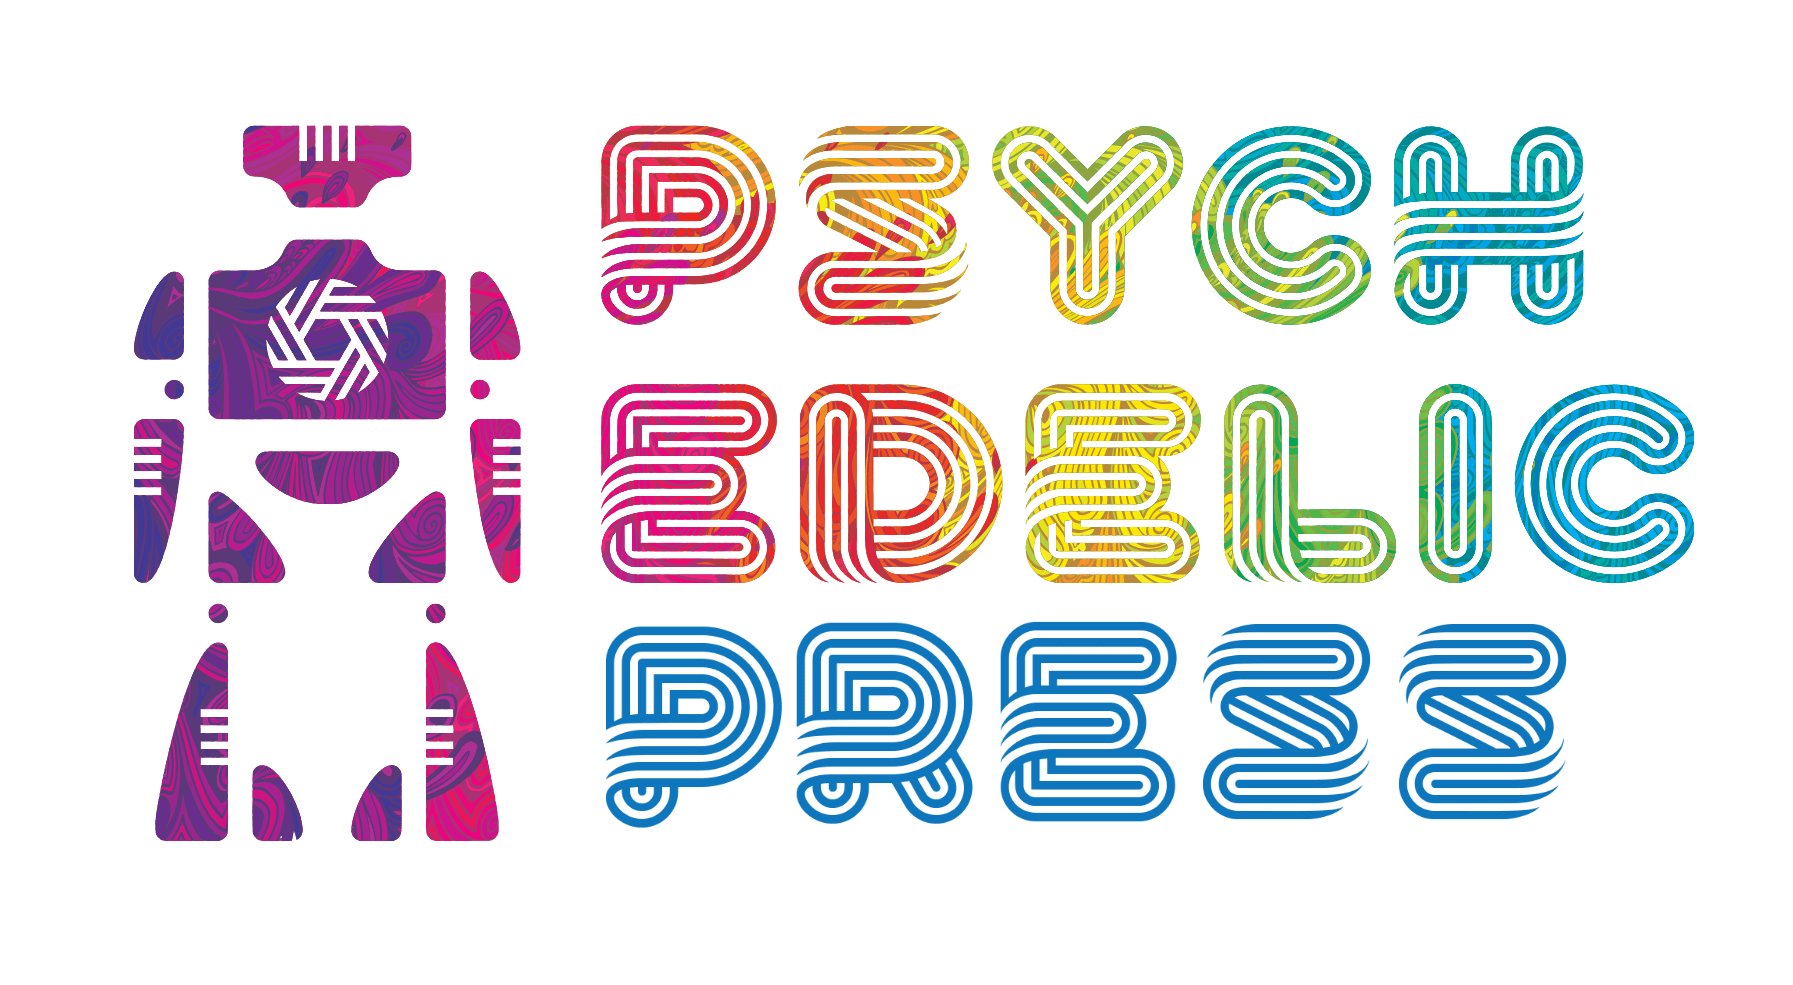 Psychedelic Robot